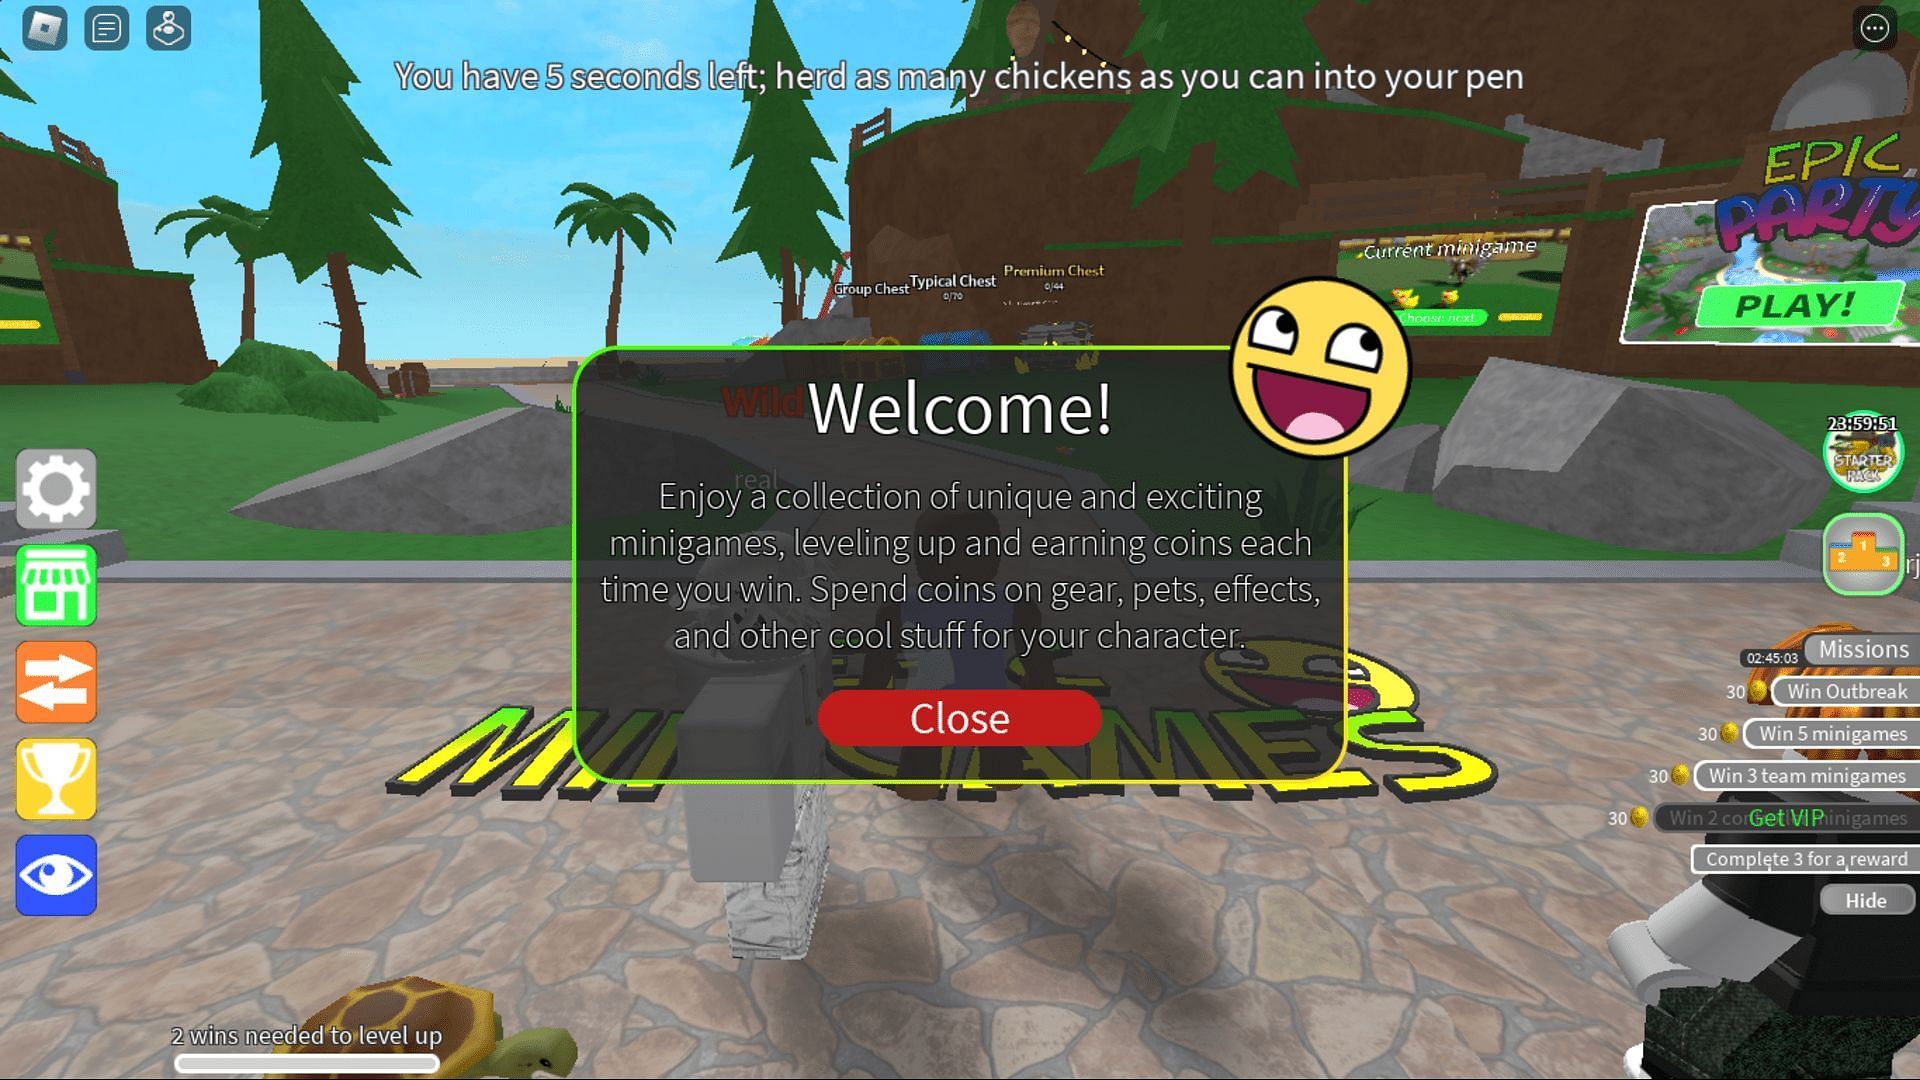 The welcome screen in Epic Minigames (Image via Roblox)